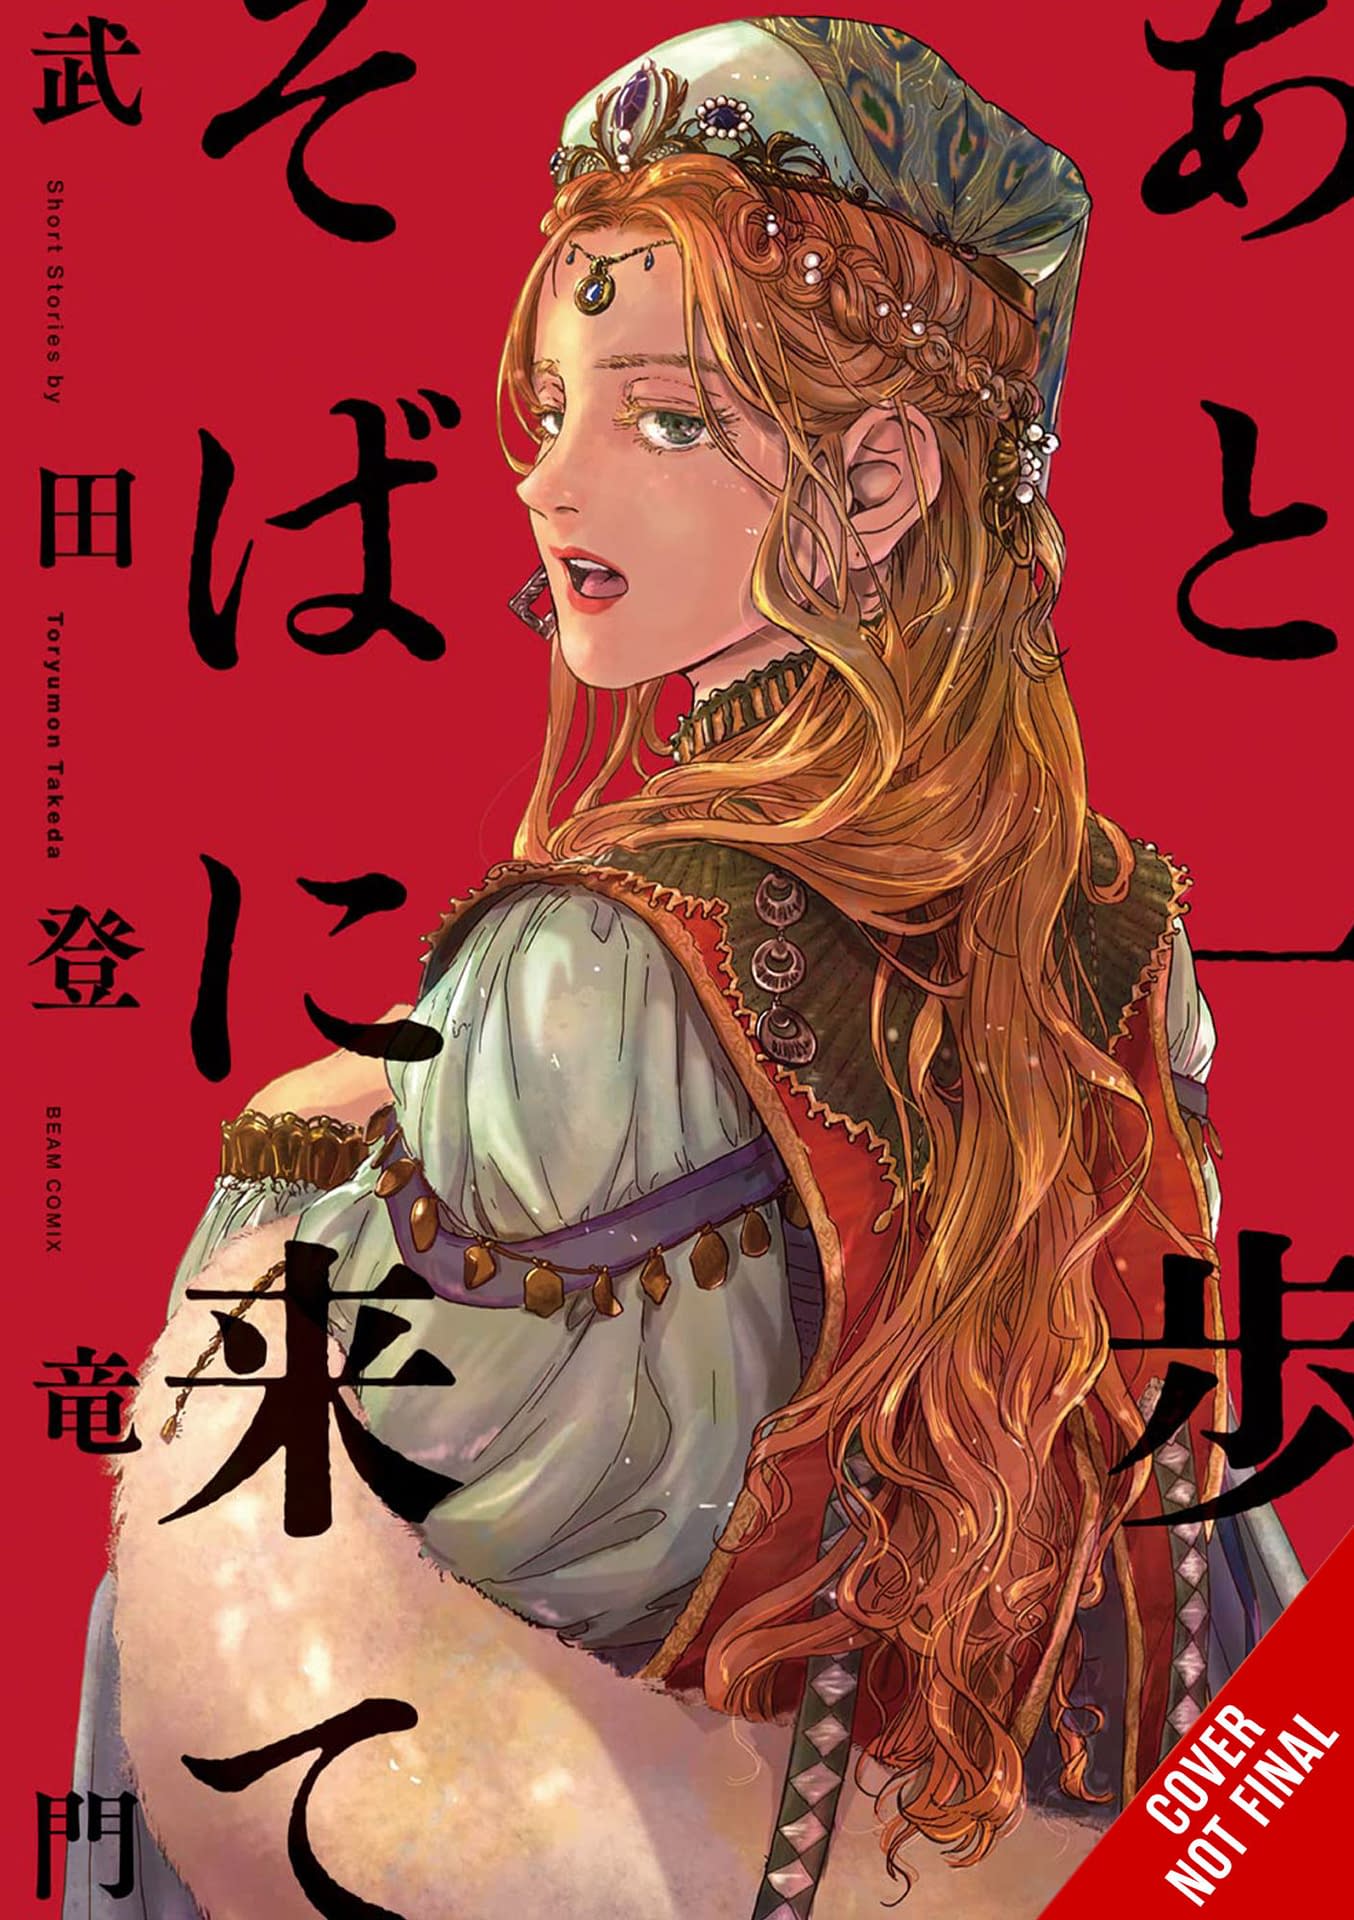 Yen Press on X: Freya manages to be the center of attention, even